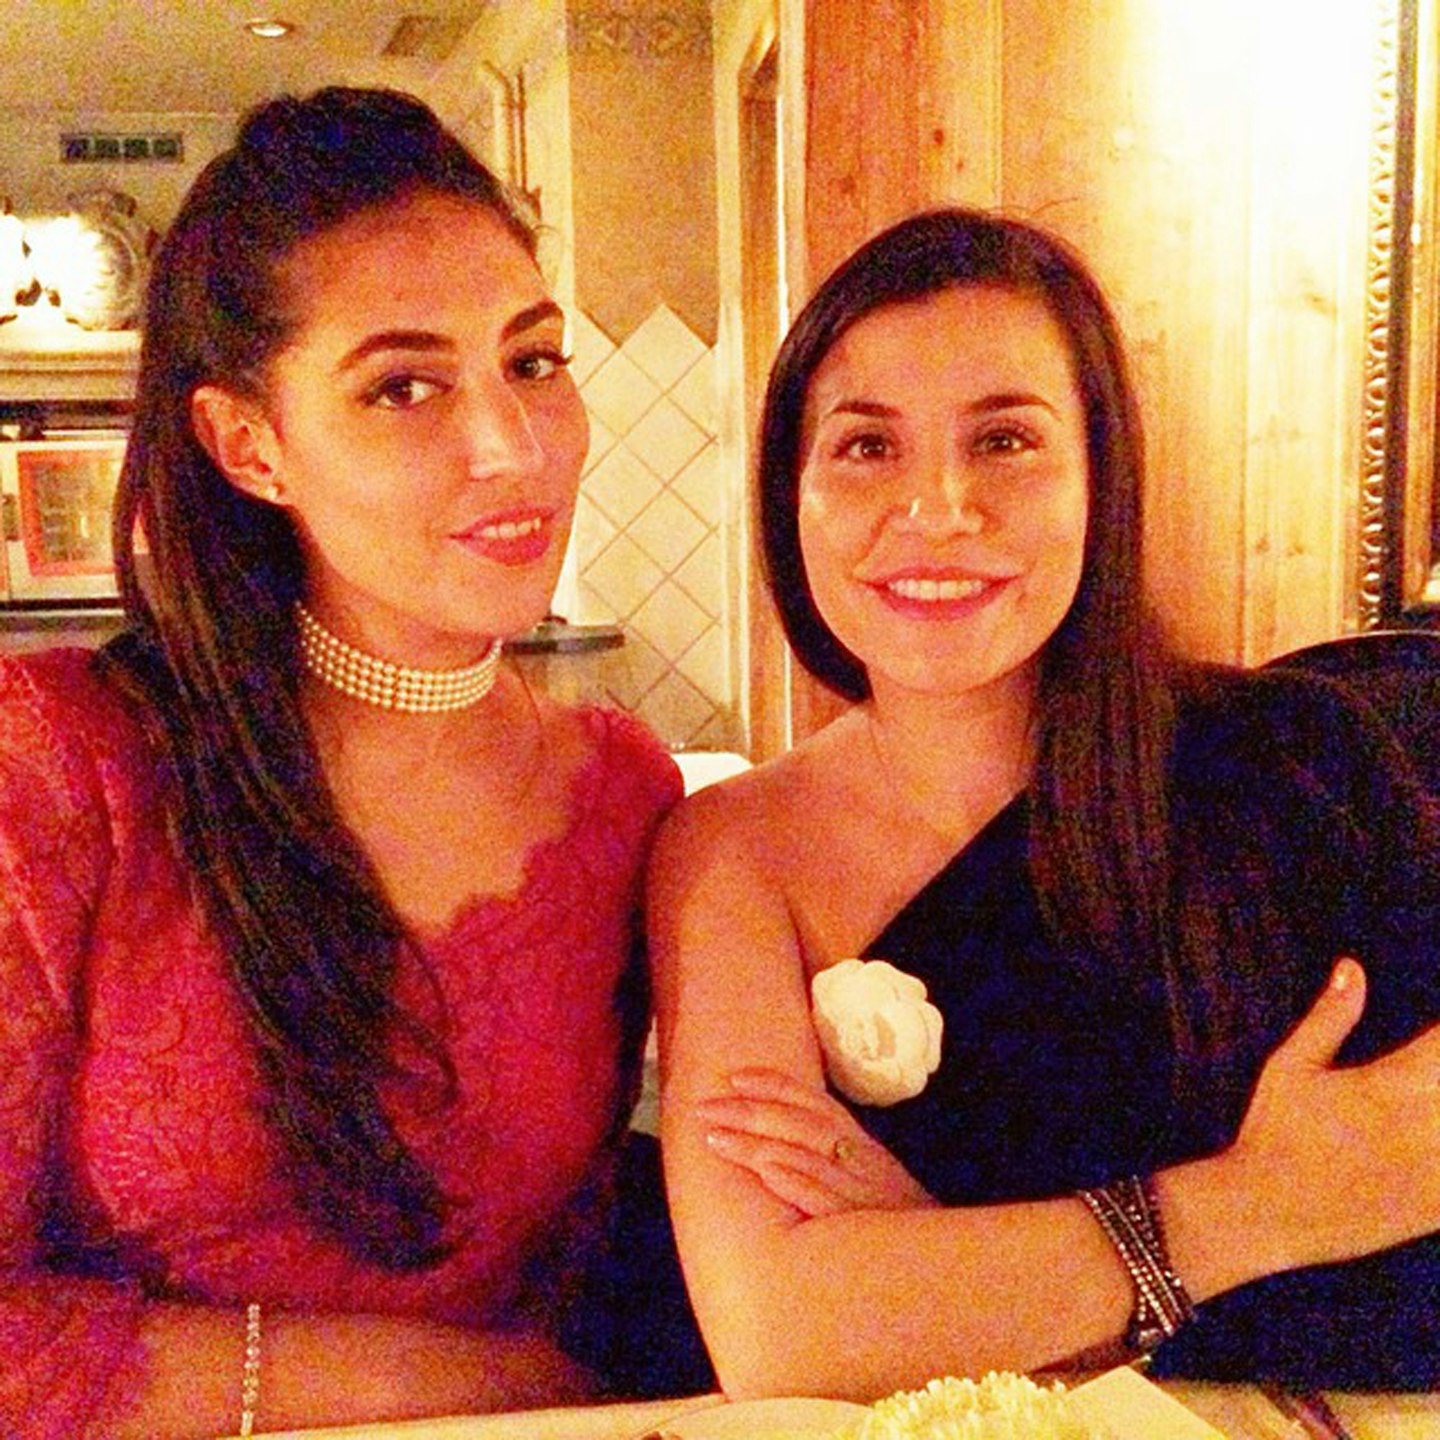 Our Alya Mooro with ASMALLWORLD guest at the cocktail dinner